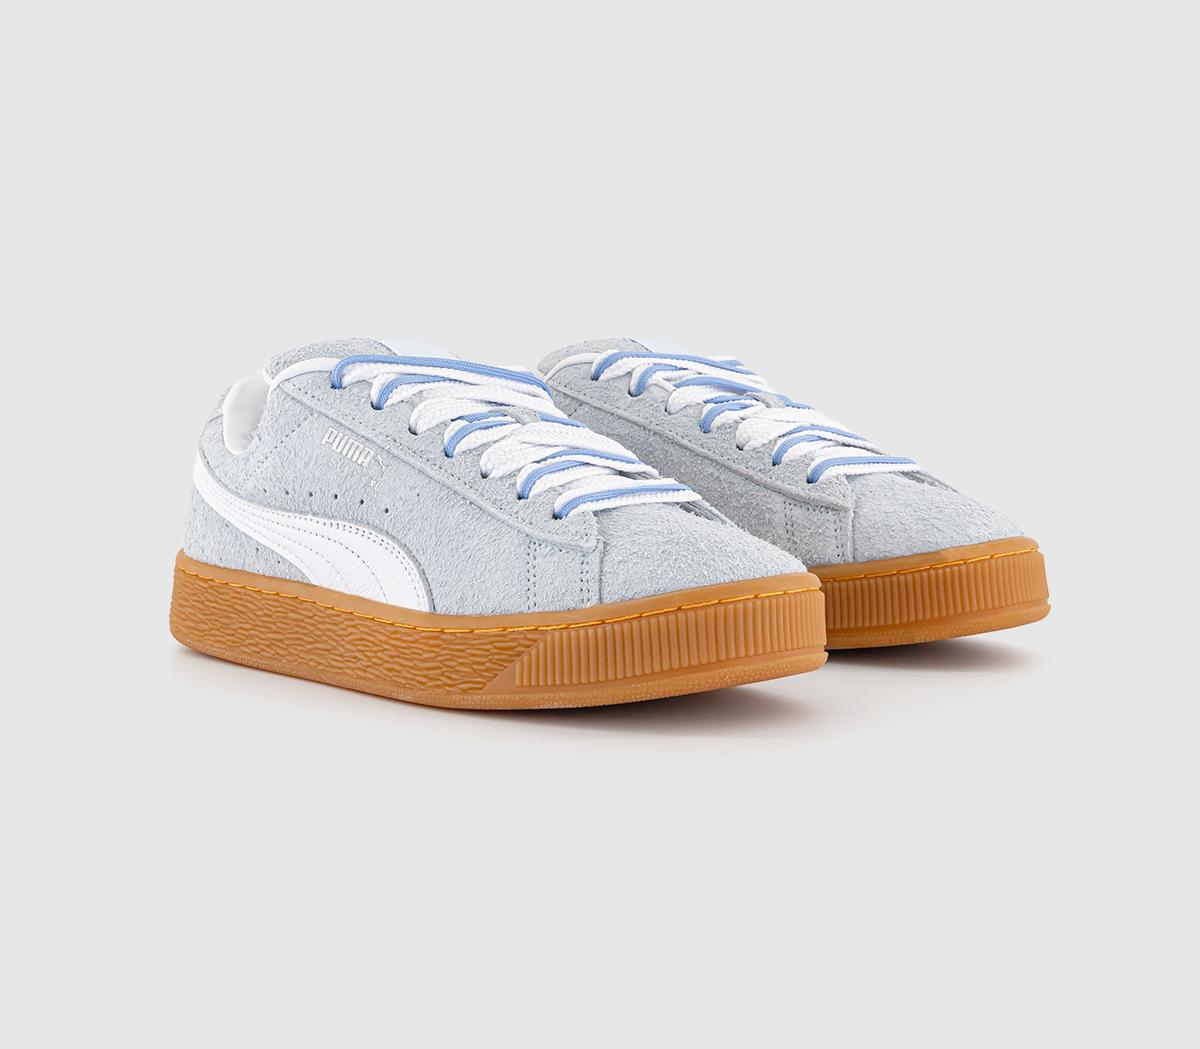 Puma Womens Suede Xl Trainers Icy Blue White Silver, 7